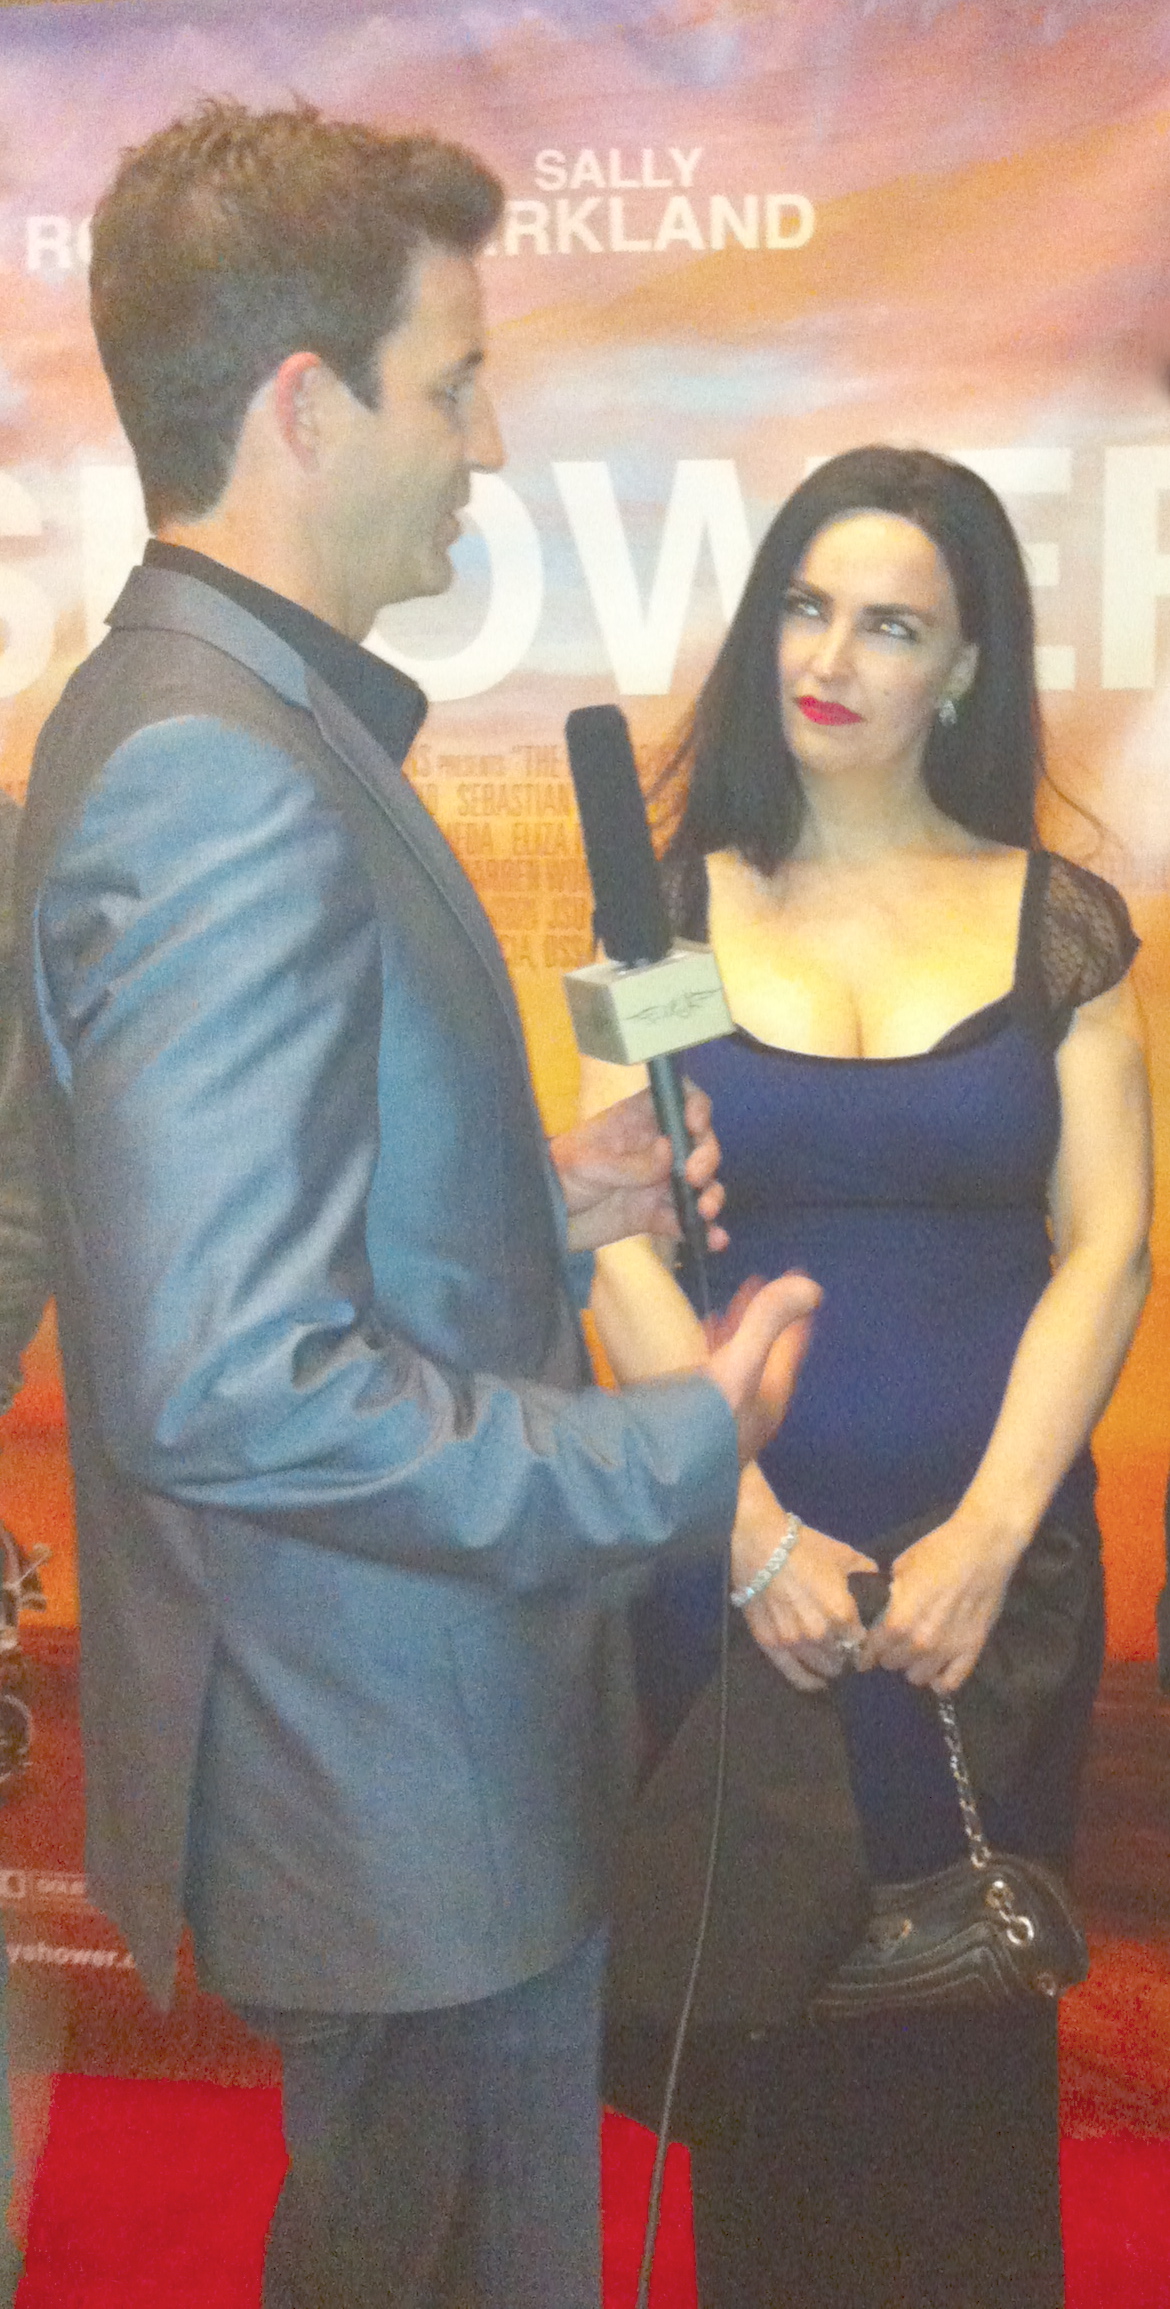 ACTRESS ALEXIS KILEY BEING INTERVIEWED ON THE RED CARPET FILM PREMIERE OF 